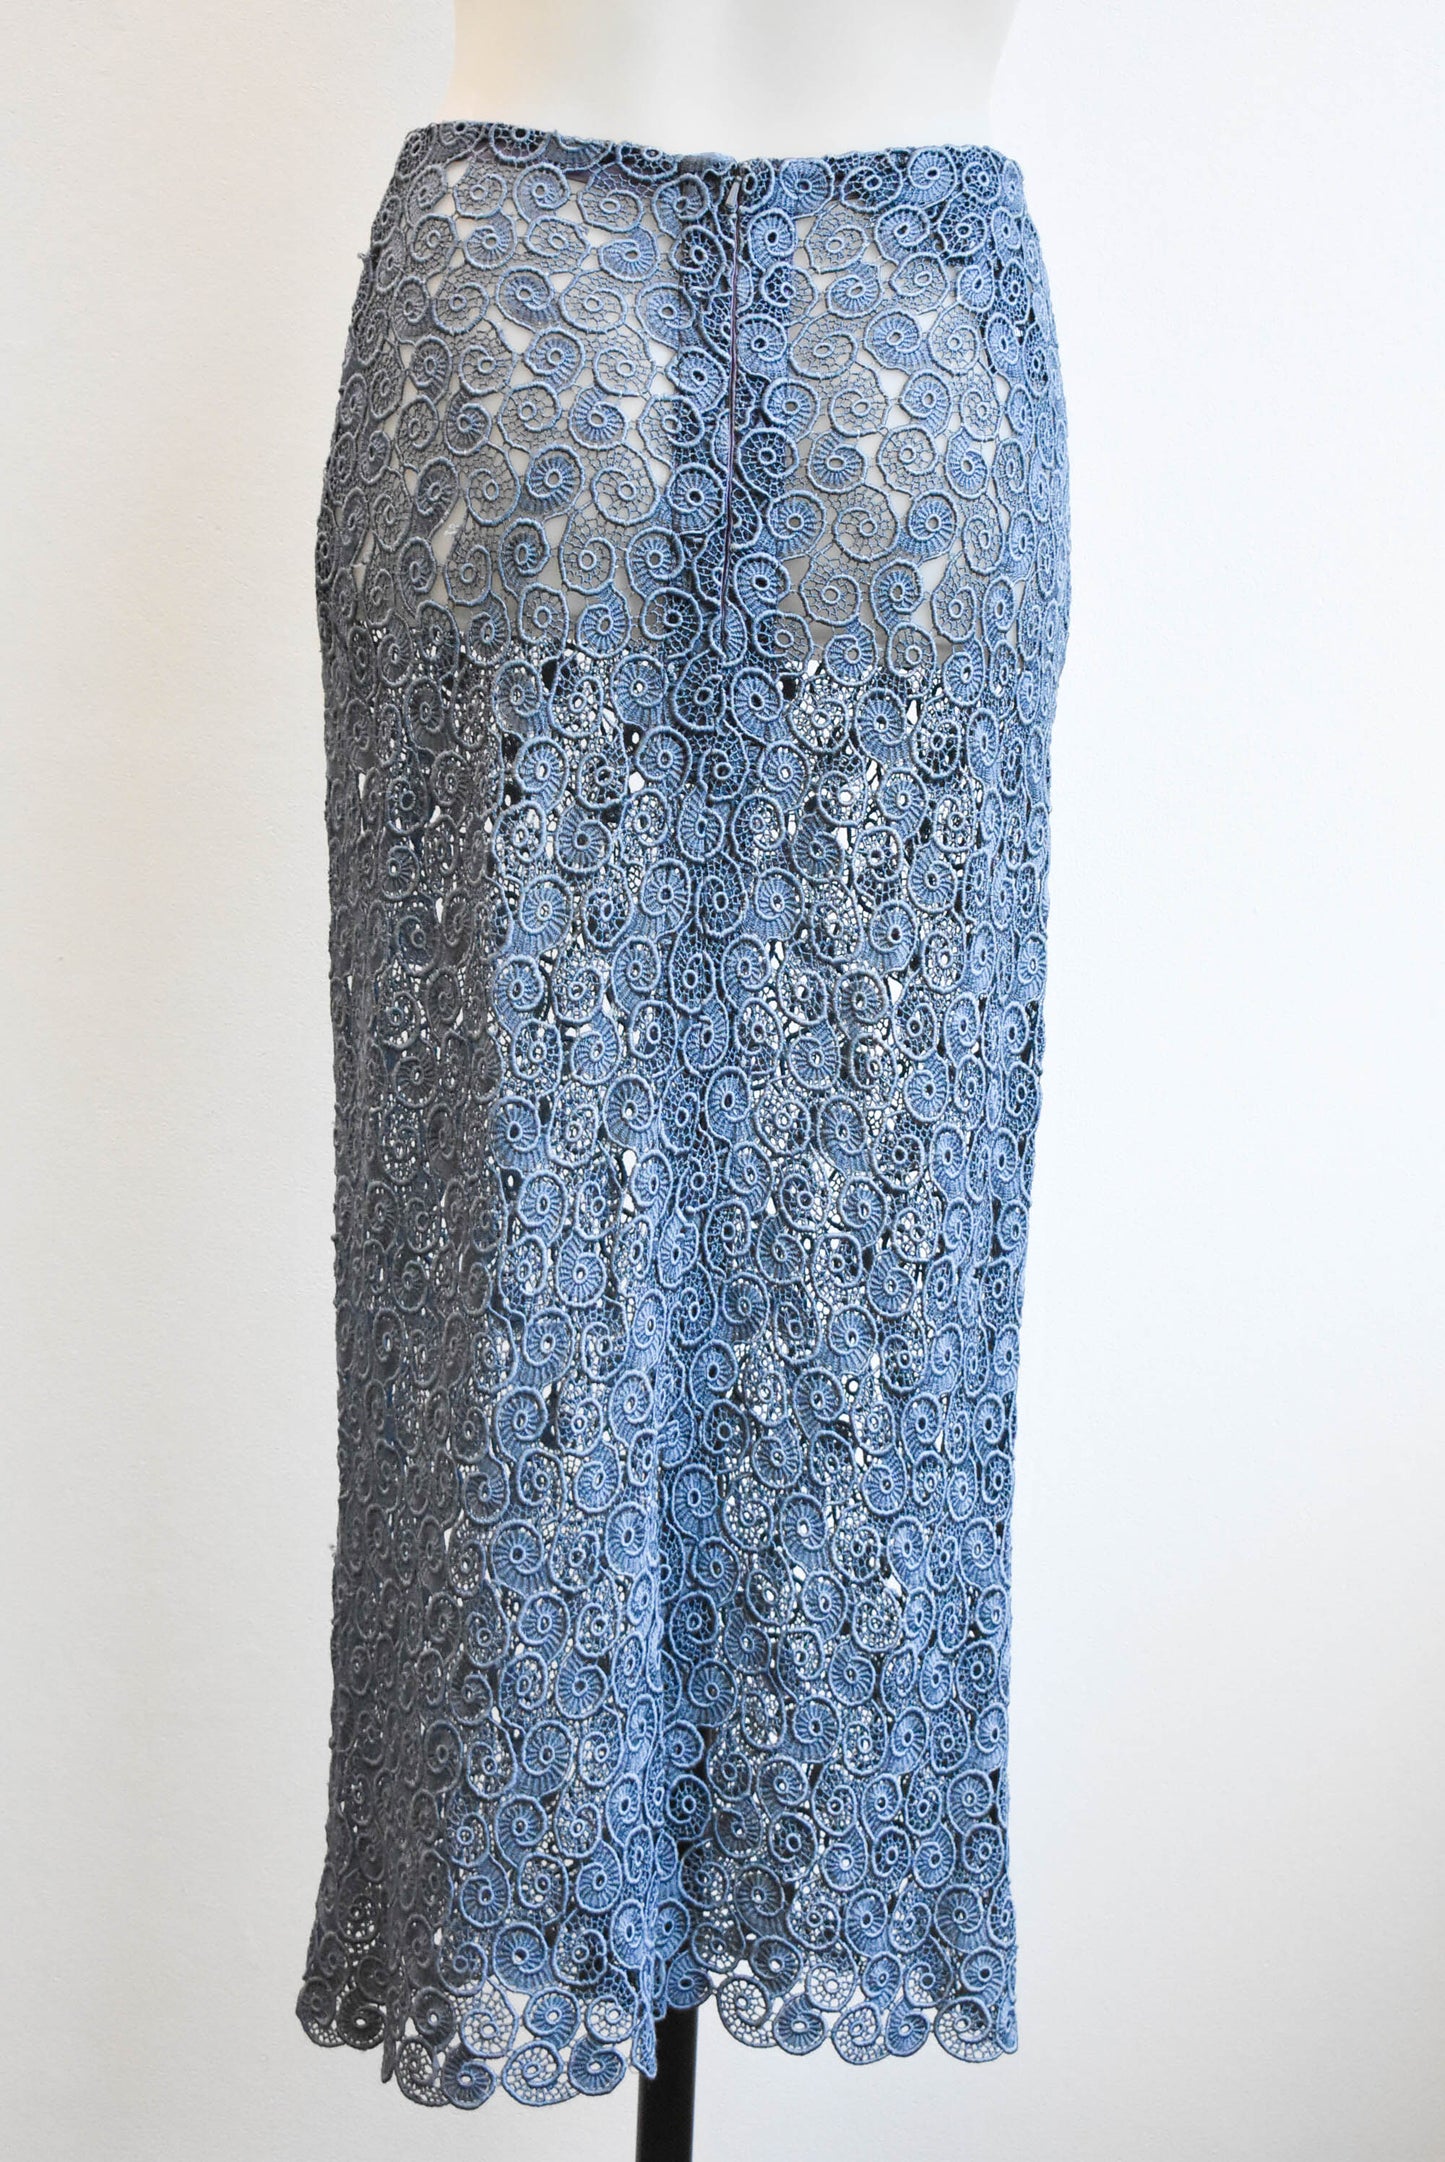 Carlson petrol blue lace pencil overskirt, size S